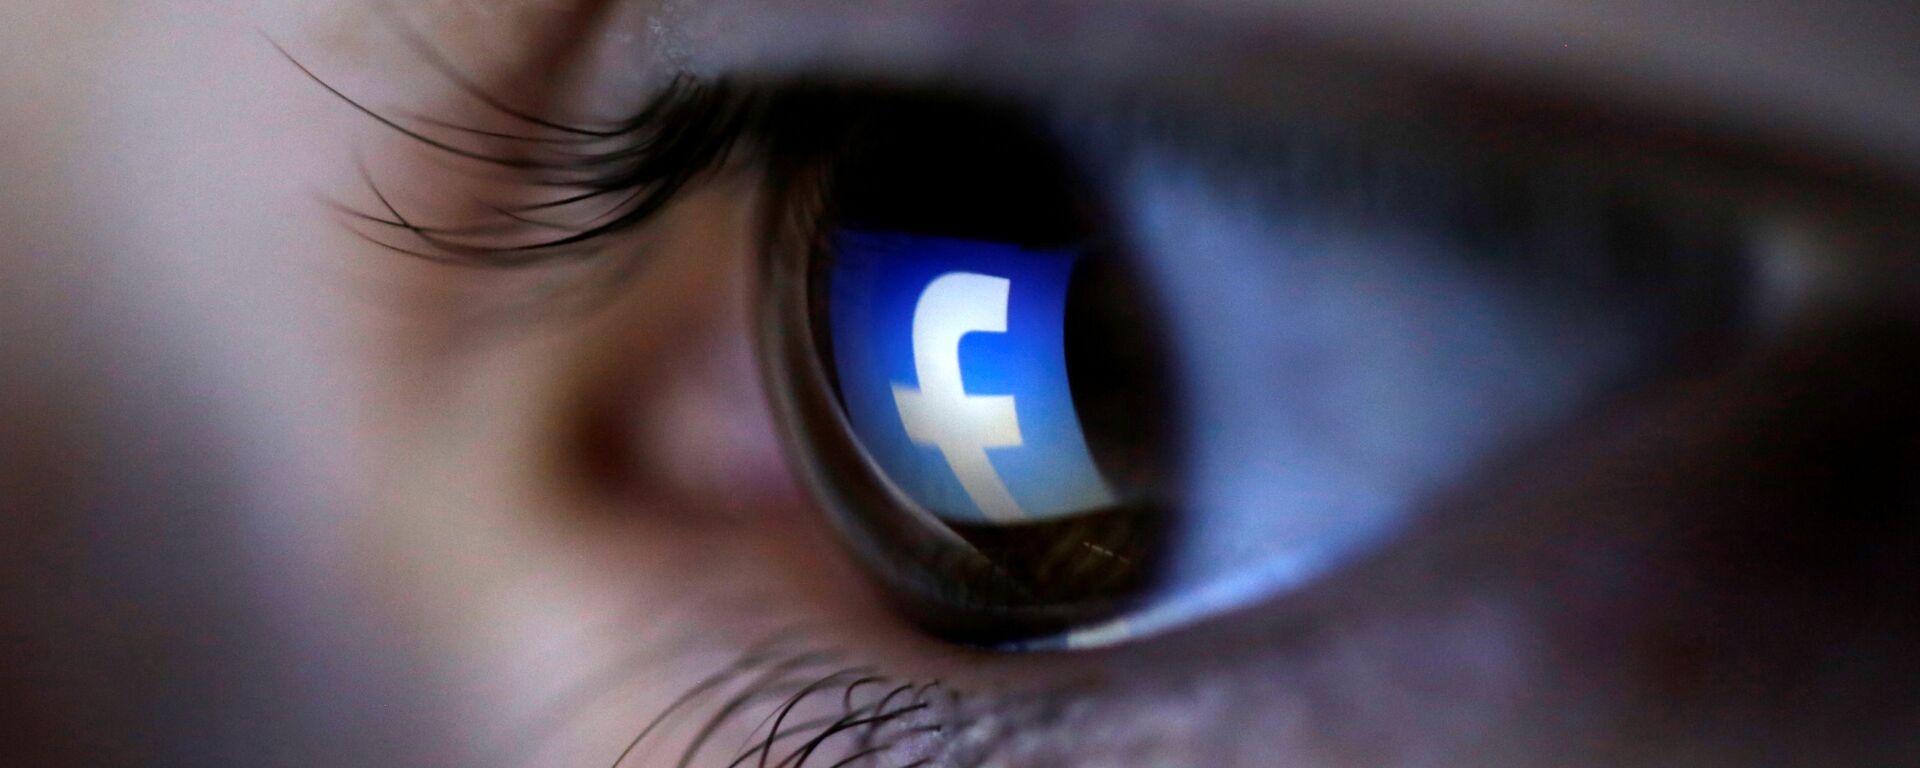 A picture illustration shows a Facebook logo reflected in a person's eye, in Zenica, March 13, 2015 - Sputnik International, 1920